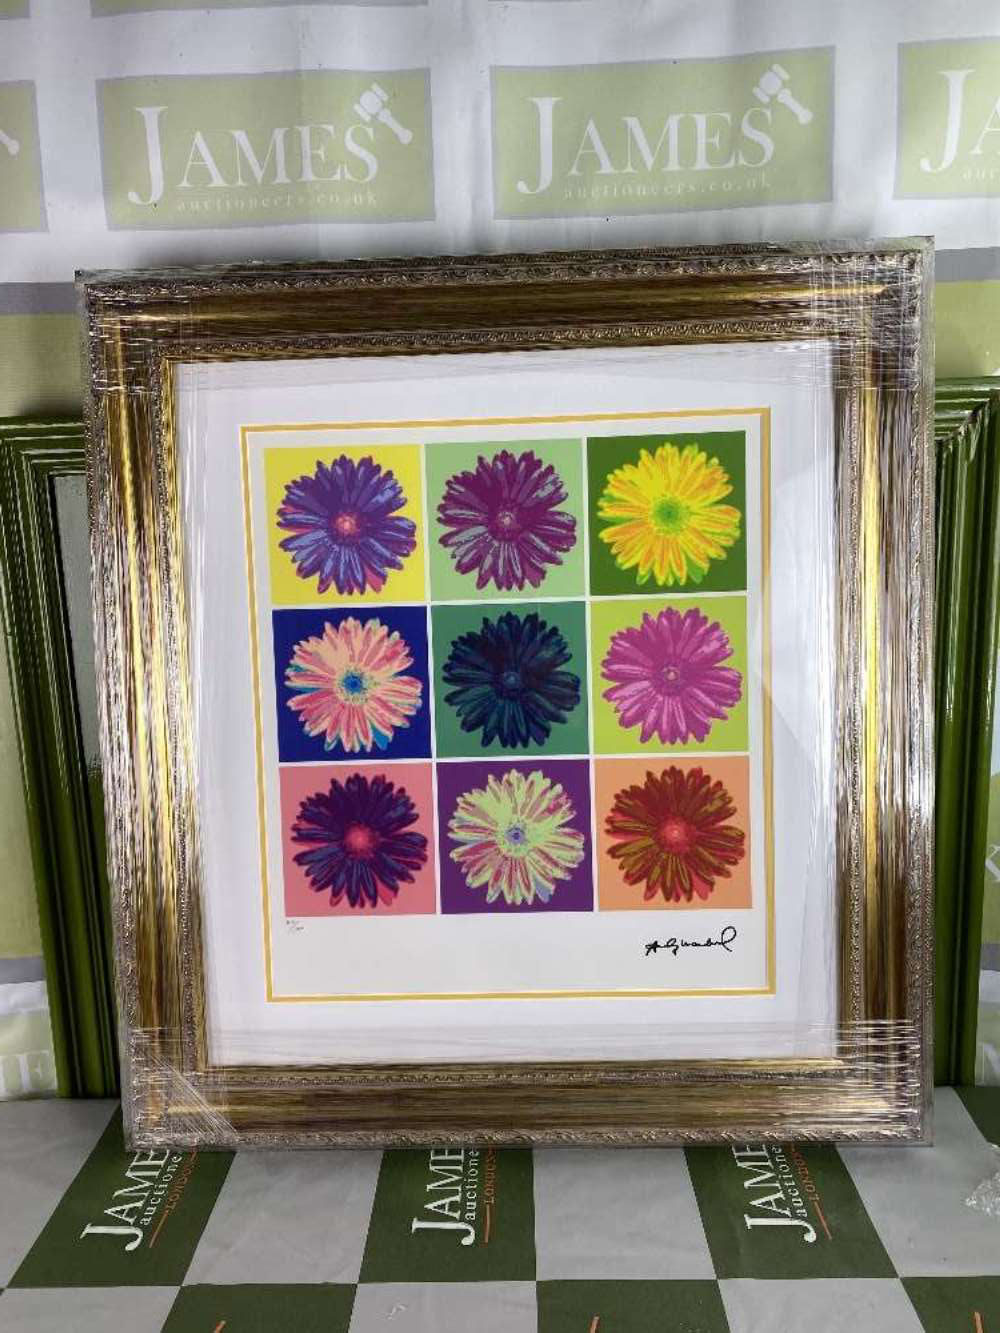 Andy Warhol (1928-1987) “Flowers” Numbered #50/100 Lithograph, Ornate Framed. - Image 5 of 6